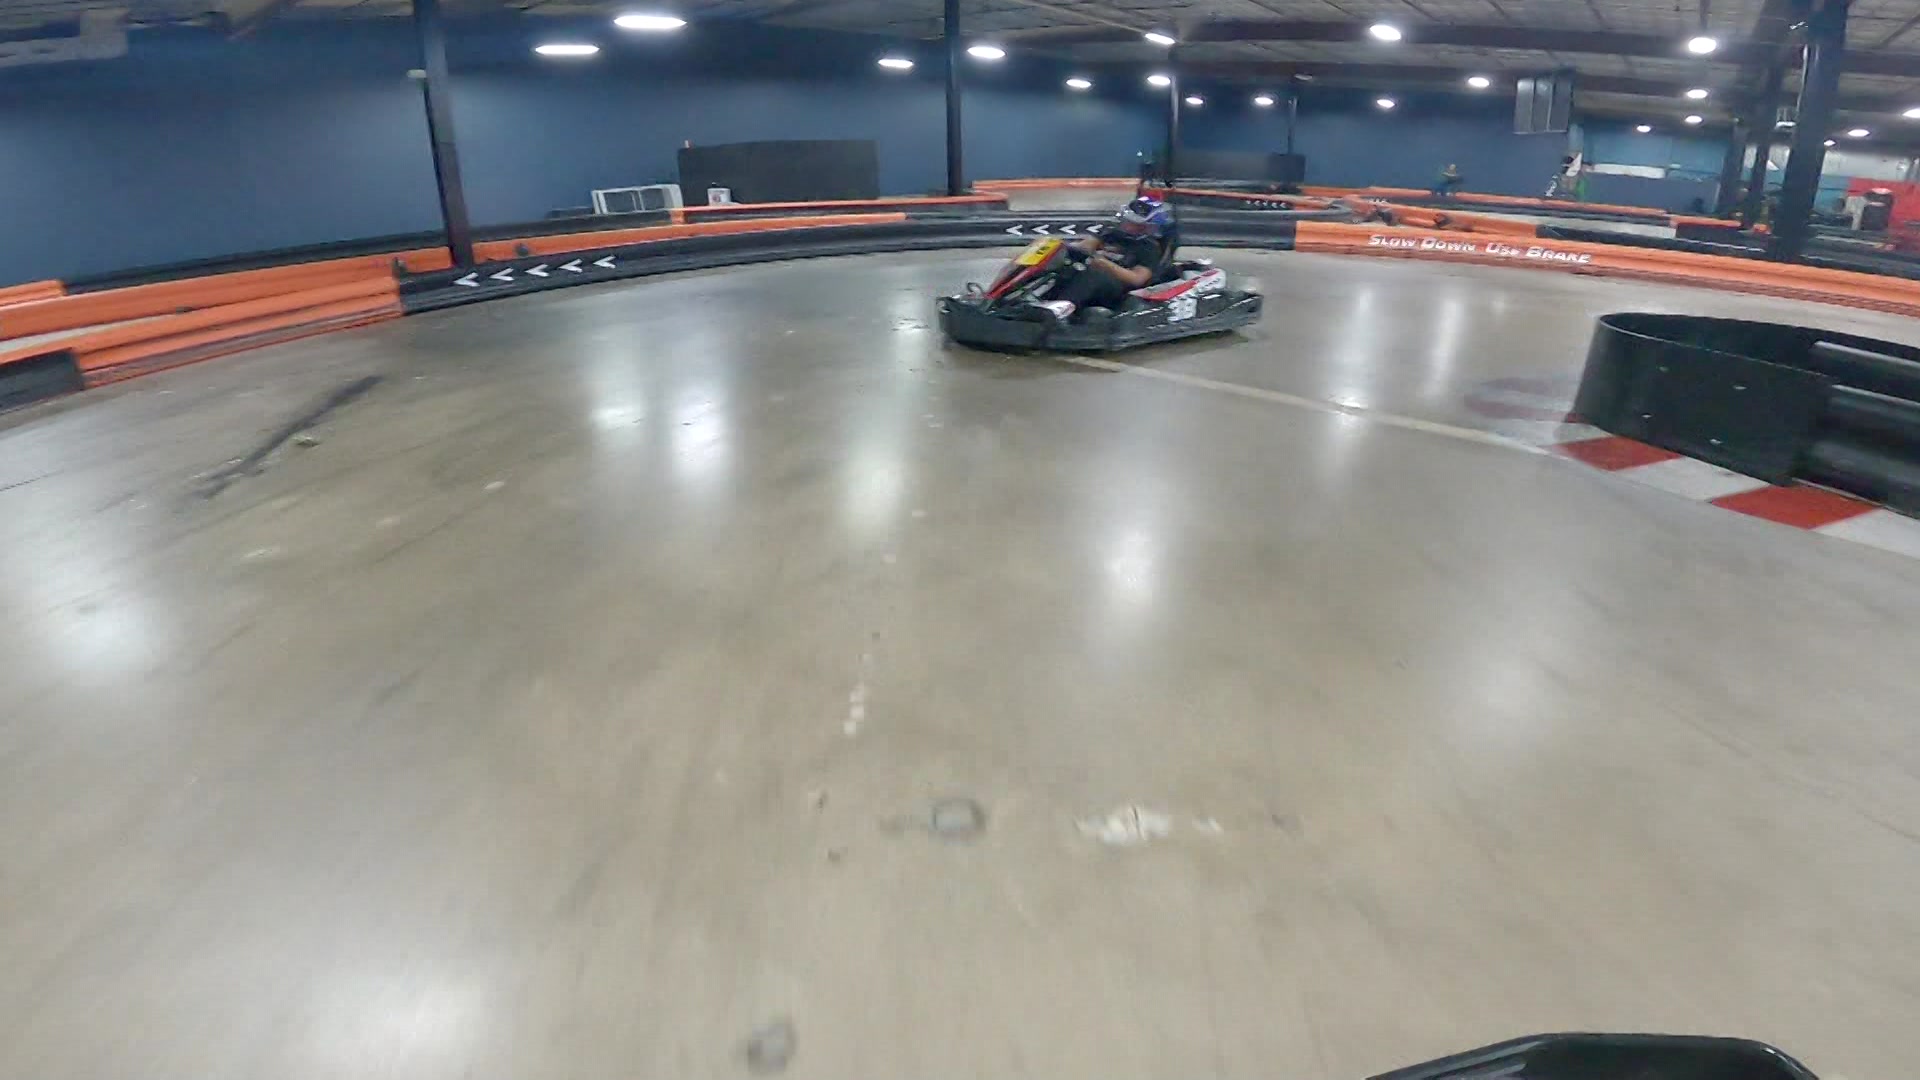 Waukesha welcomes new indoor speedway with help from local fundraiser